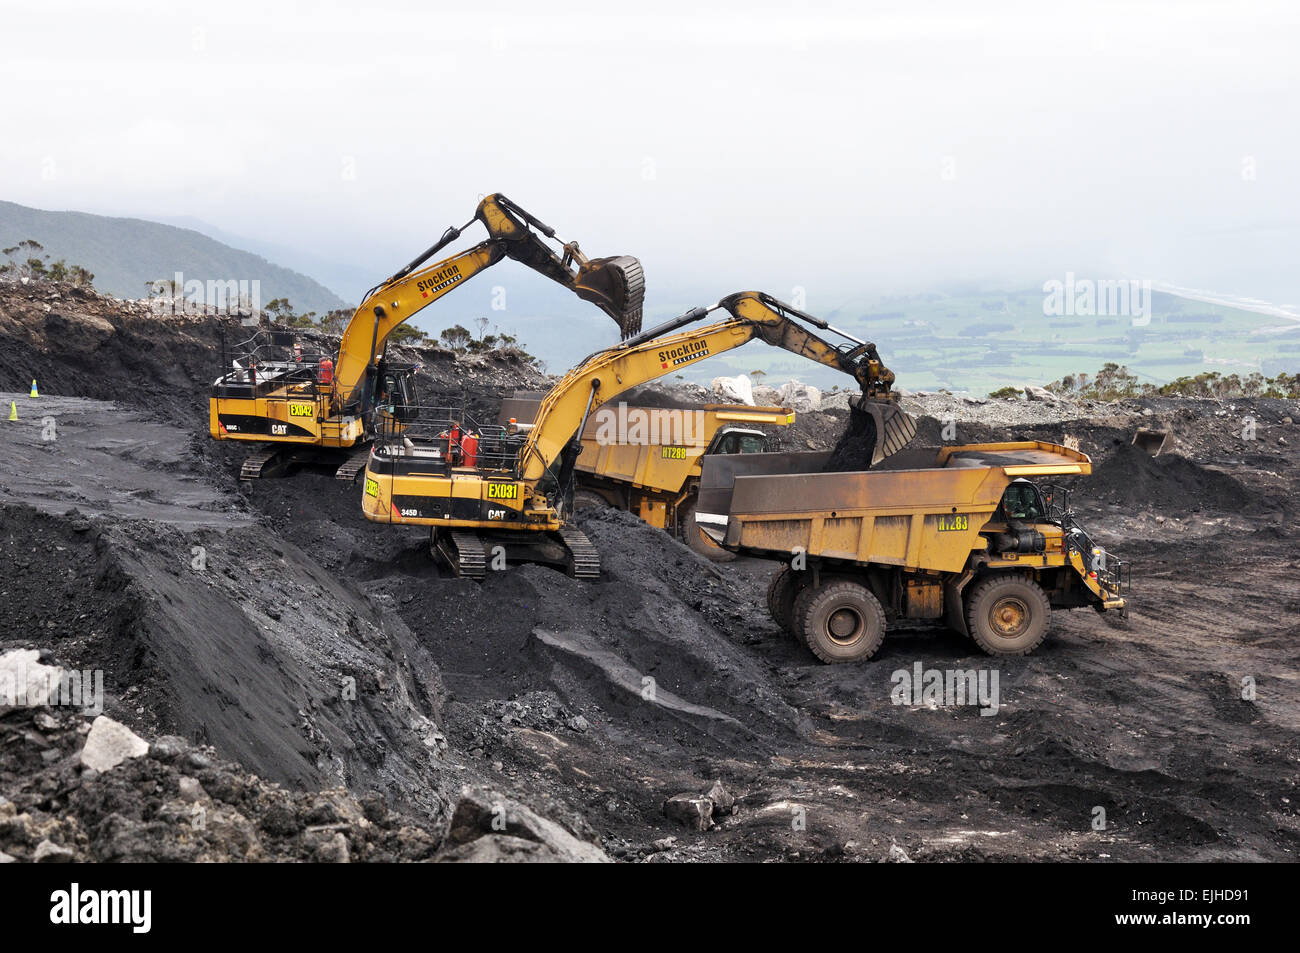 WESTPORT, NEW ZEALAND, MARCH 4, 2015: A pair of diggers remove high grade coal from a seam at an open cast coal mine Stock Photo